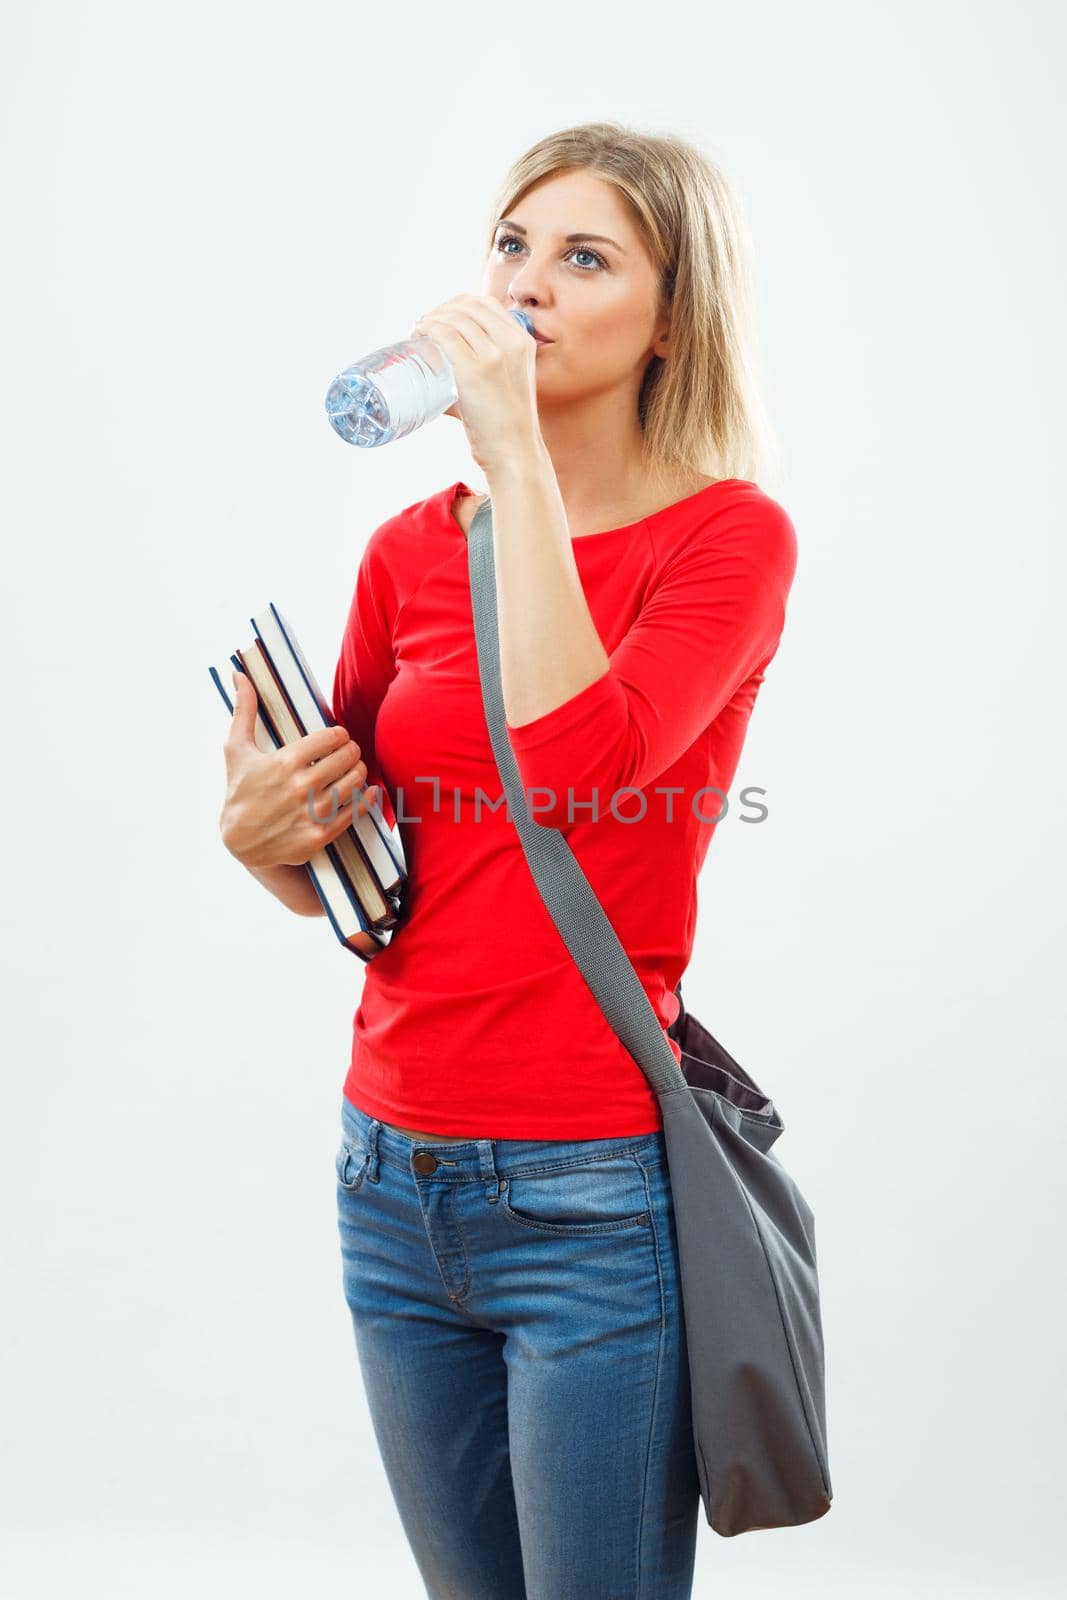 Female student drinking water.